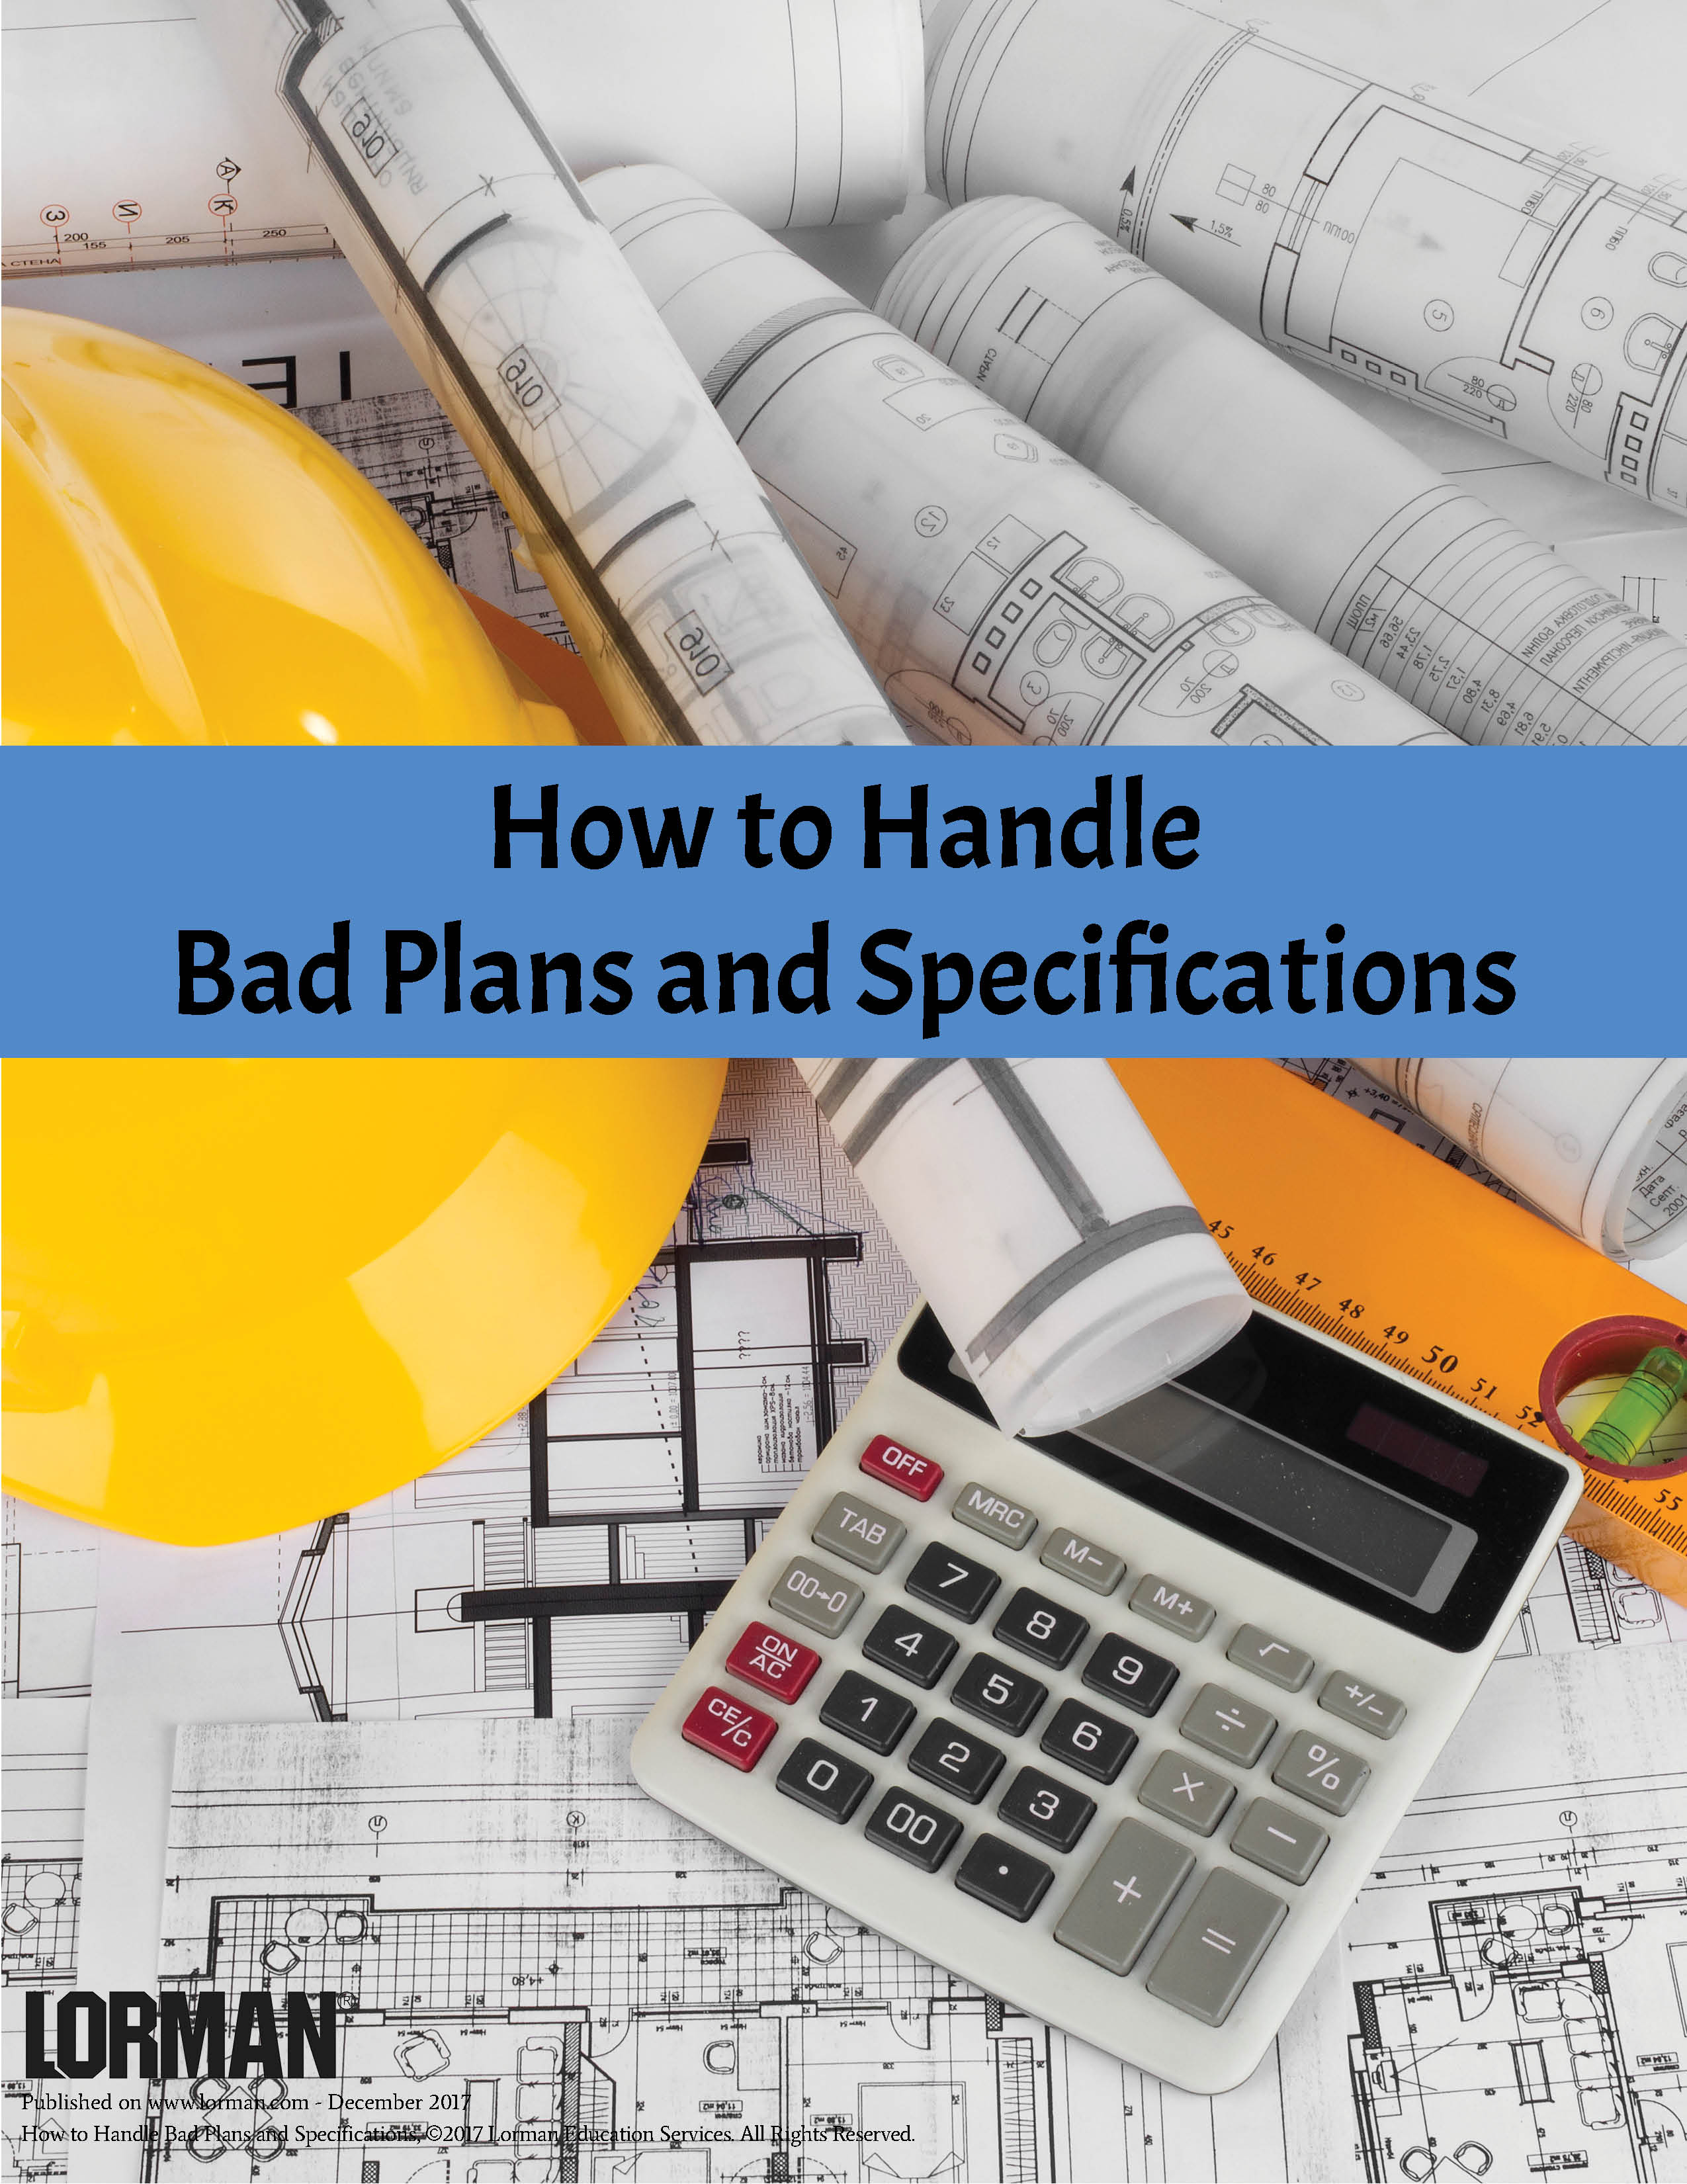 How to Handle Bad Plans and Specifications